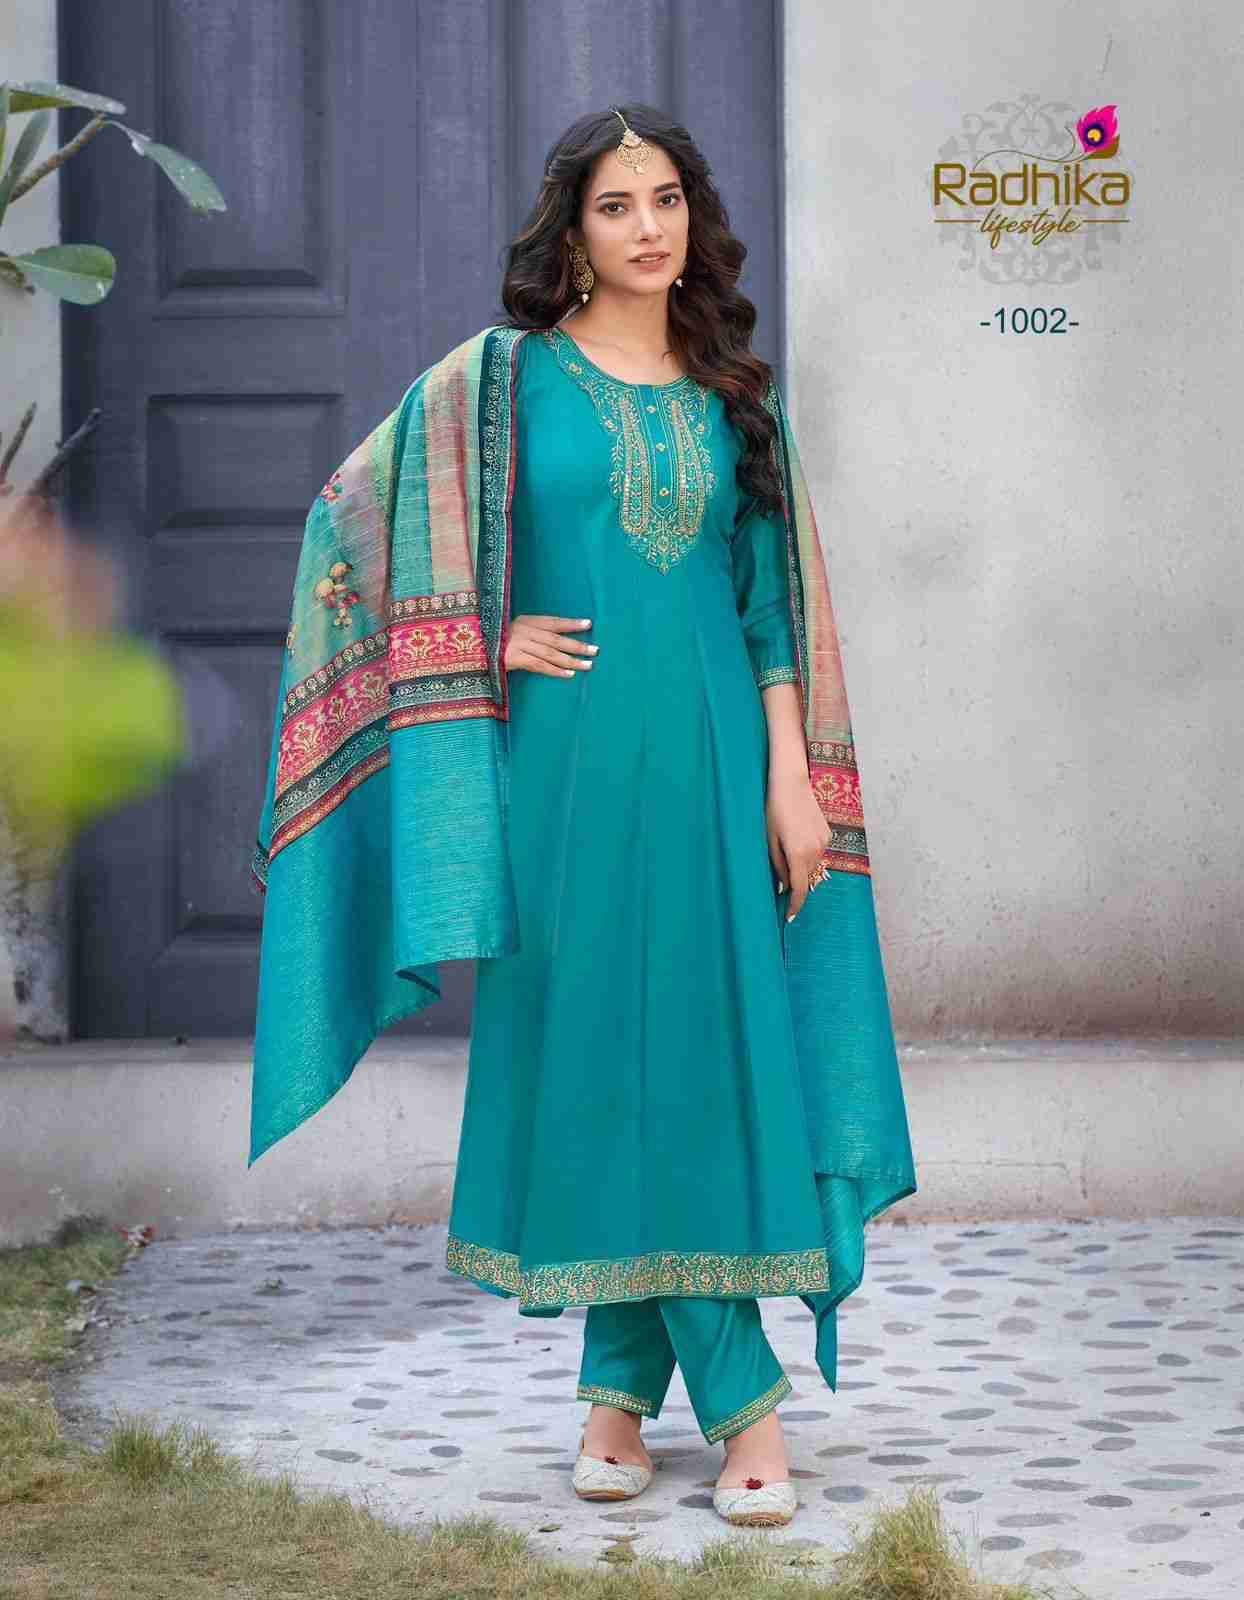 Gulmohar Vol-1 By Radhika Lifestyle 1001 To 1004 Series Beautiful Stylish Fancy Colorful Casual Wear & Ethnic Wear Collection Heavy Silk Dresses At Wholesale Price